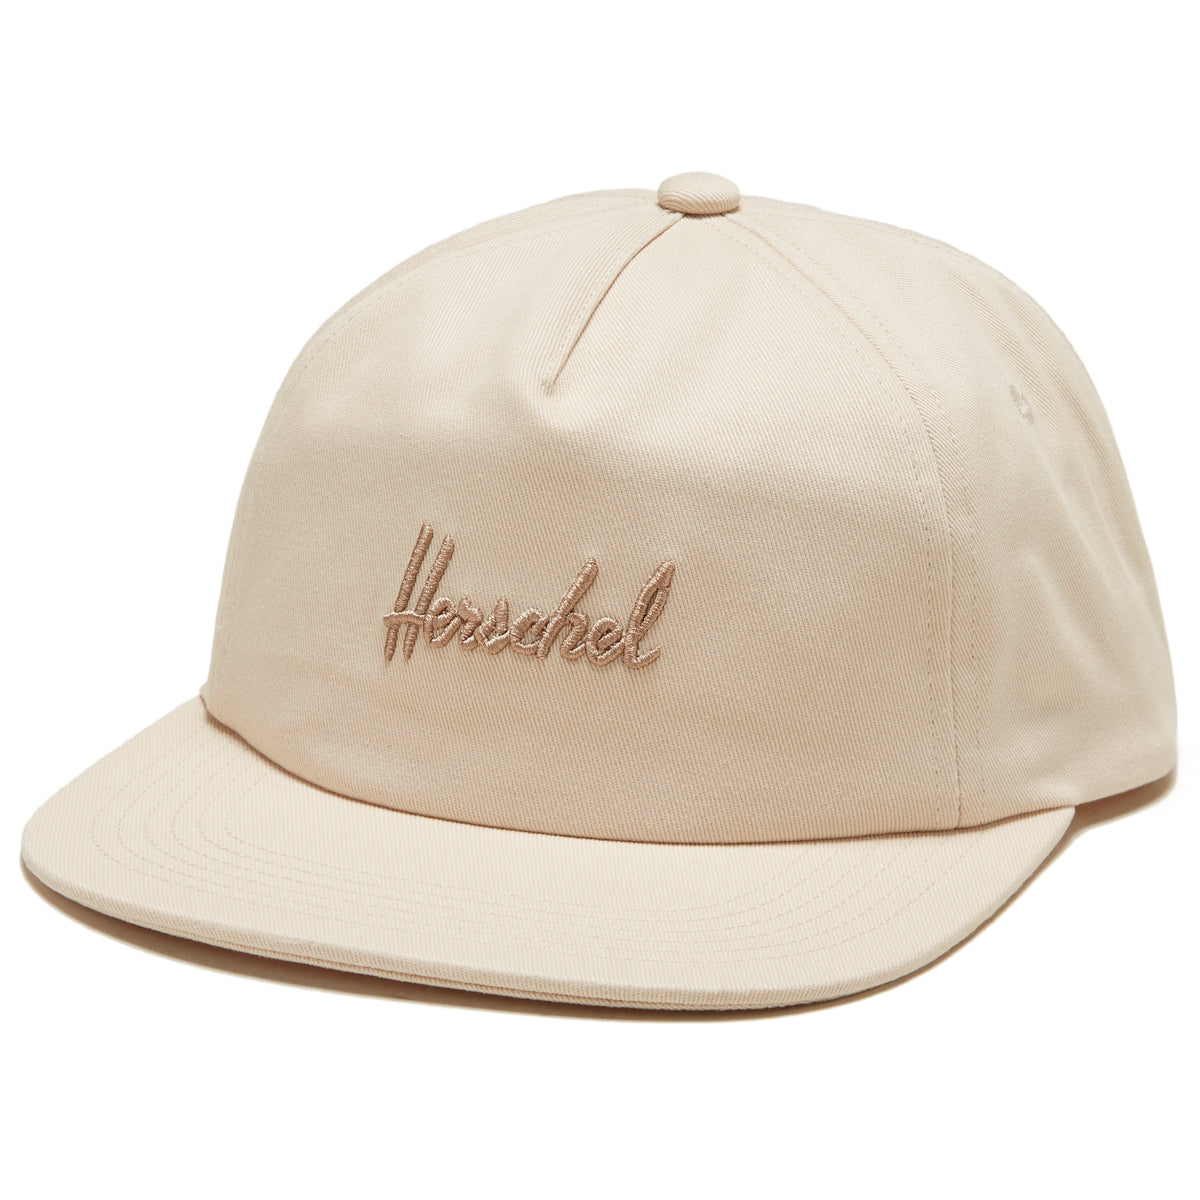 Herschel Supply Scout Cap Embroidery Hat - Whitecap Gray/Light Taupe image 1